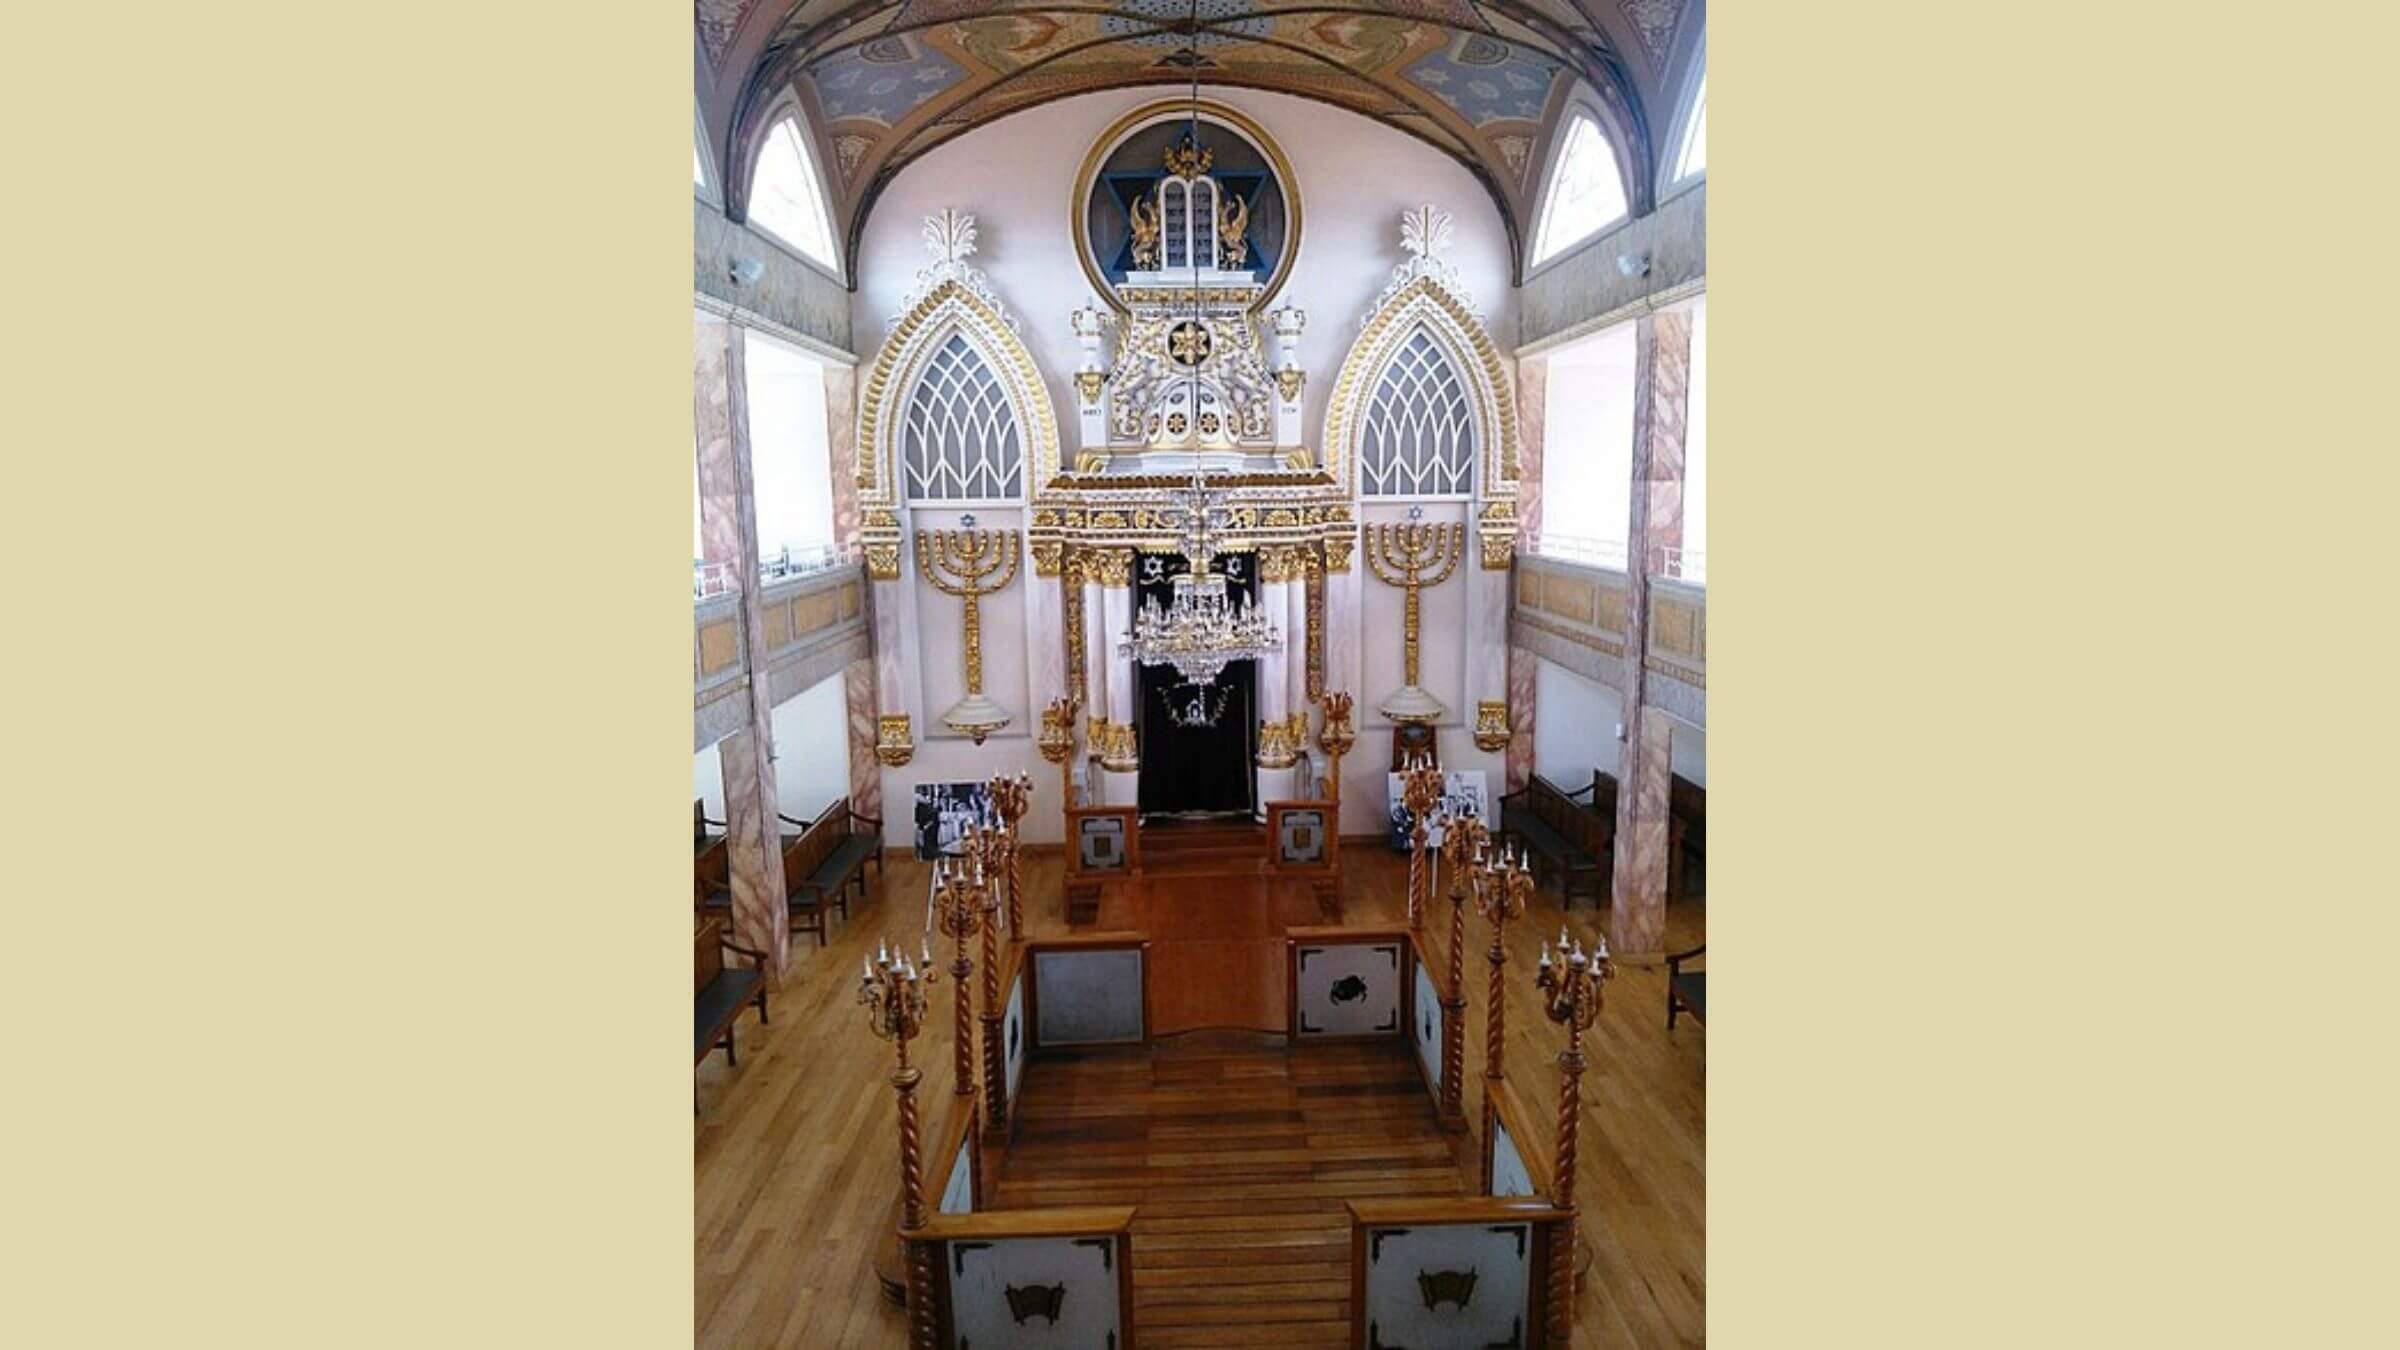 The interior of Historic Synagogue Justo Sierra 71 in Mexico City, now a cultural center.